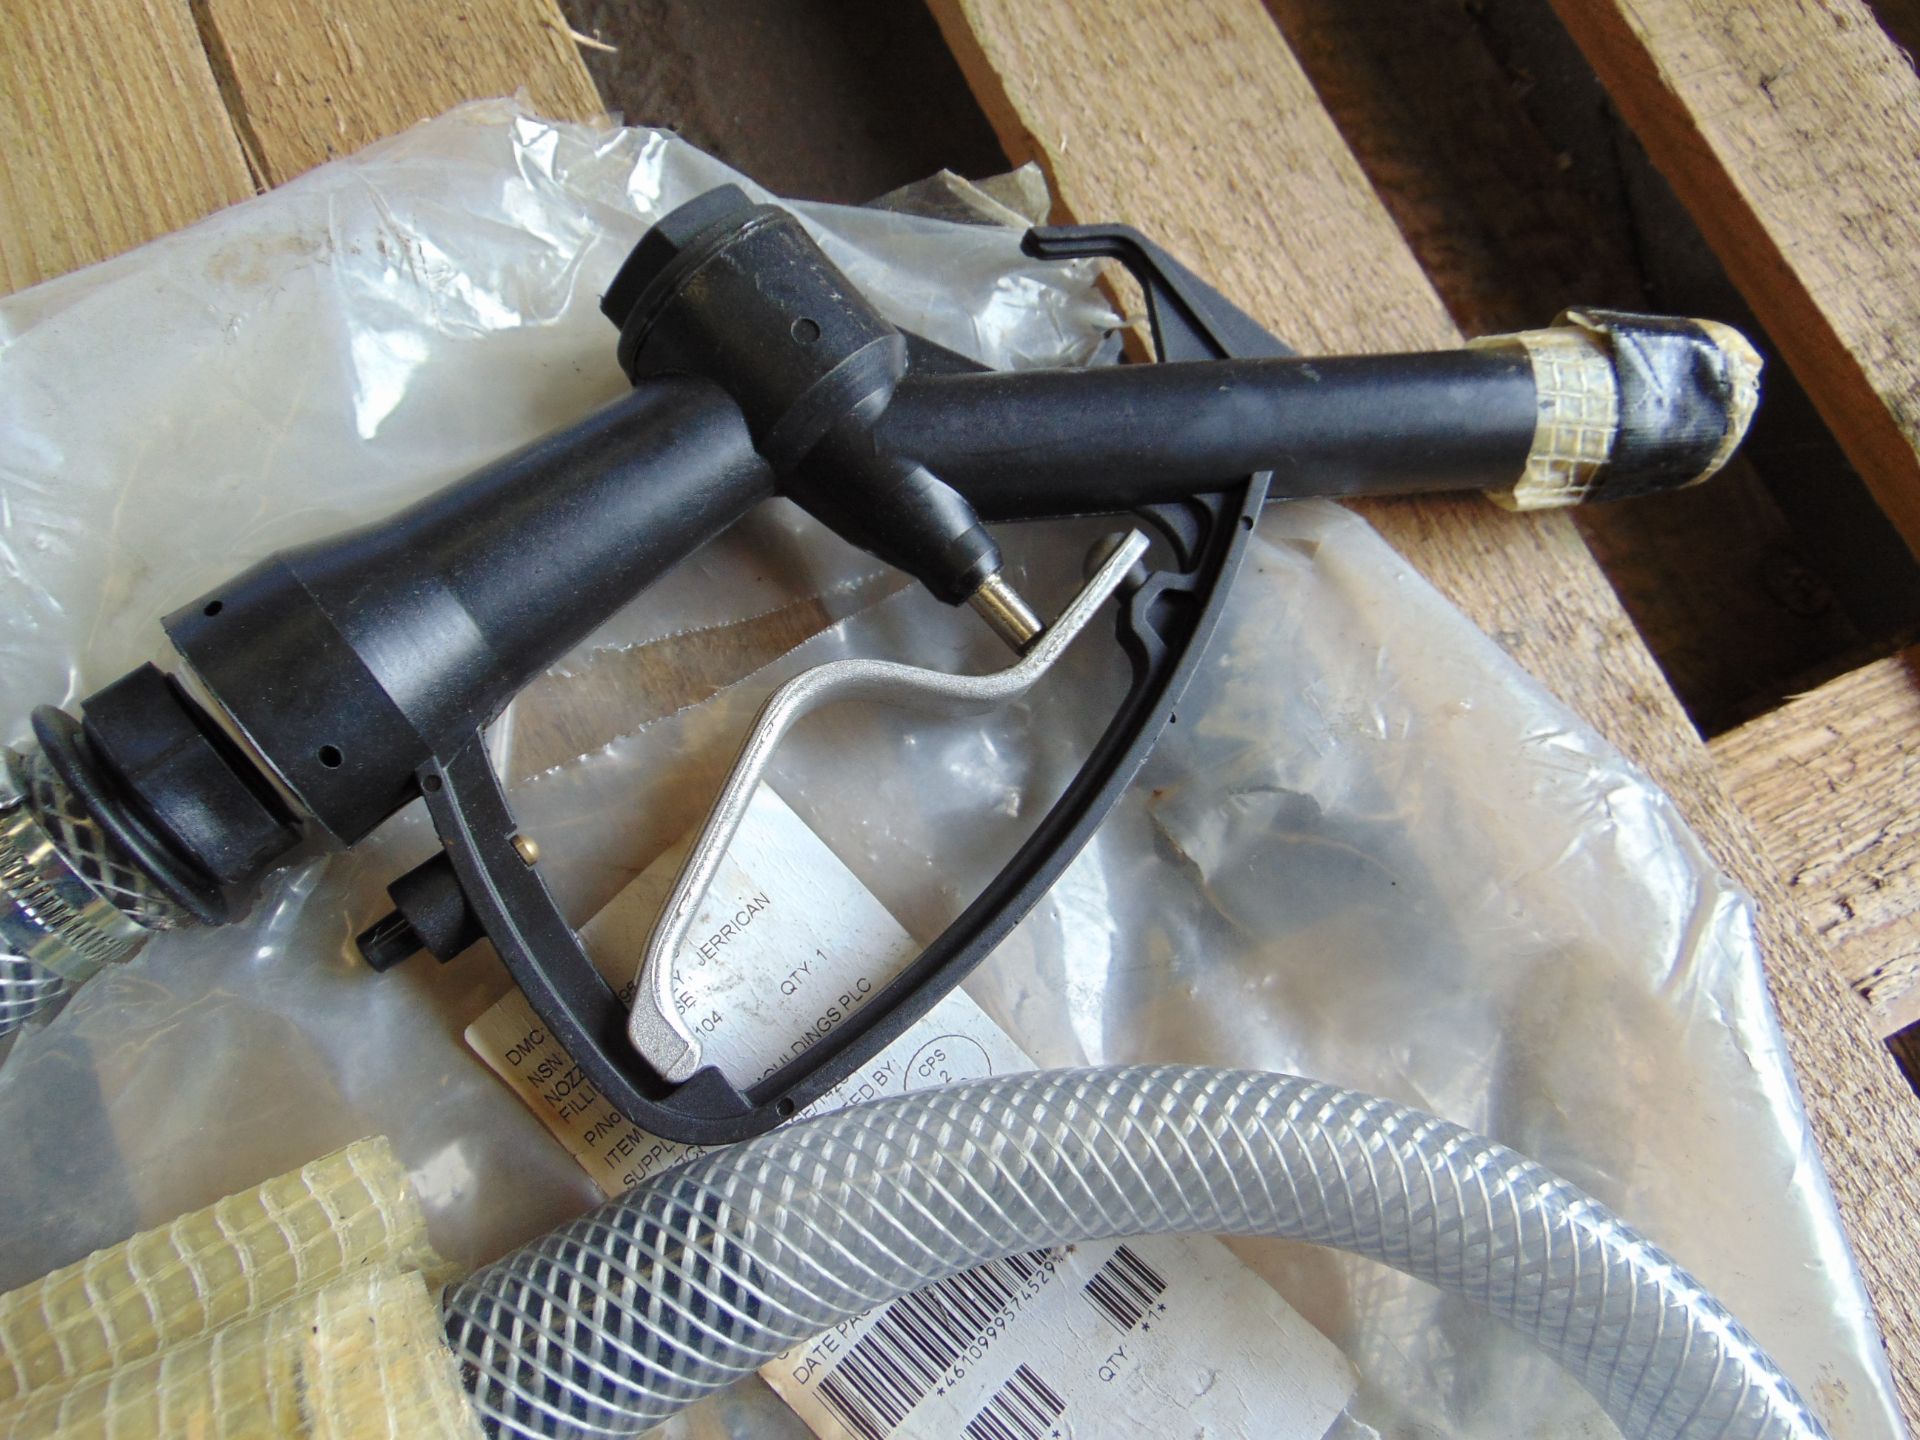 Unissued Diesel Gravity Refuelling Hose Kit c/w Nozzle and Valve as Shown - Image 2 of 6